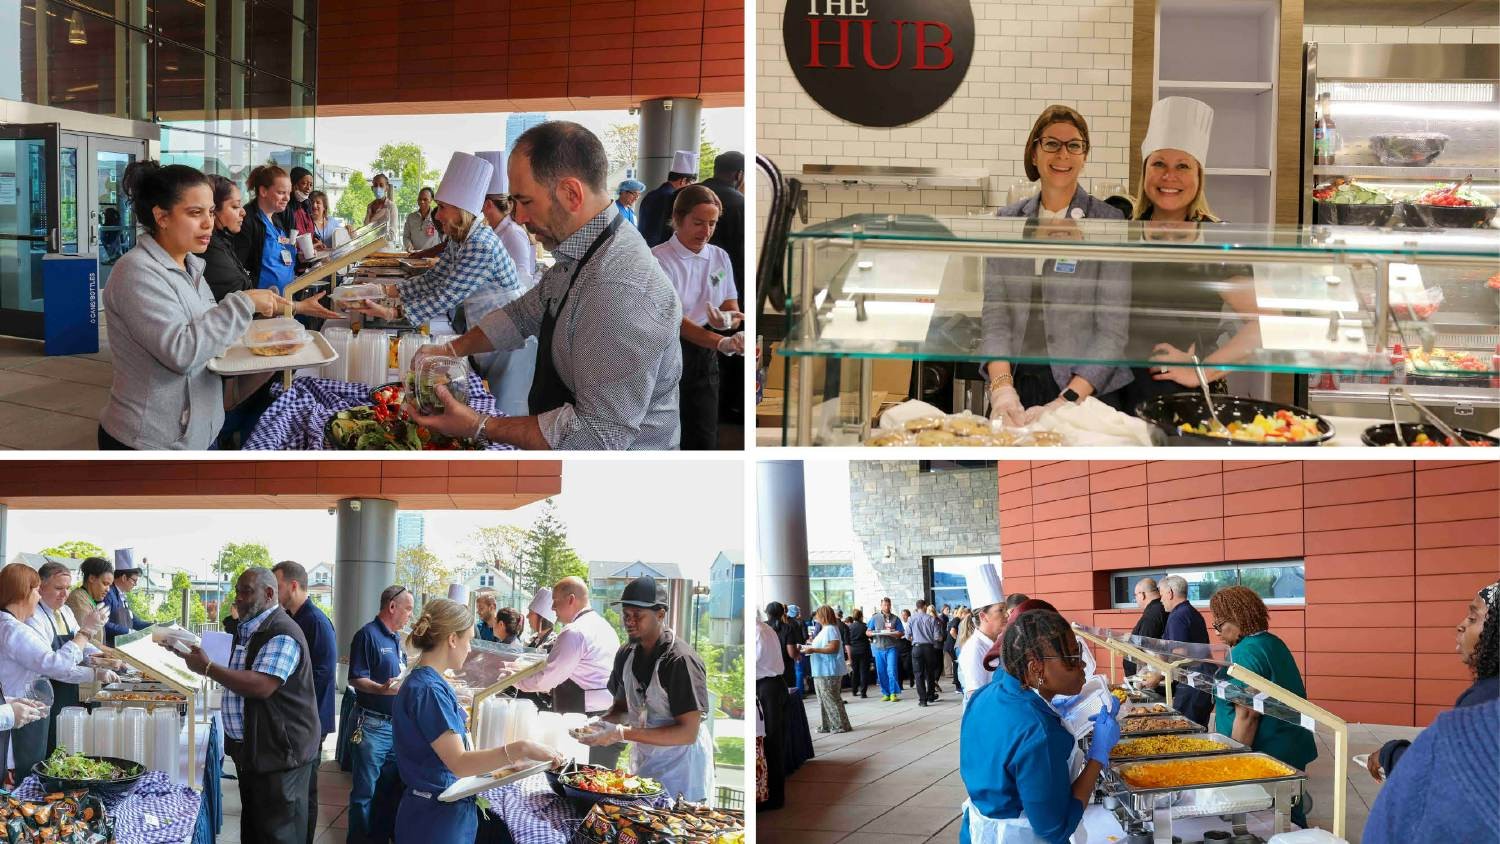 Our executives roll up their sleeves (and don chef’s hats or hairnets) to serve a BBQ lunch during Healthcare Week.